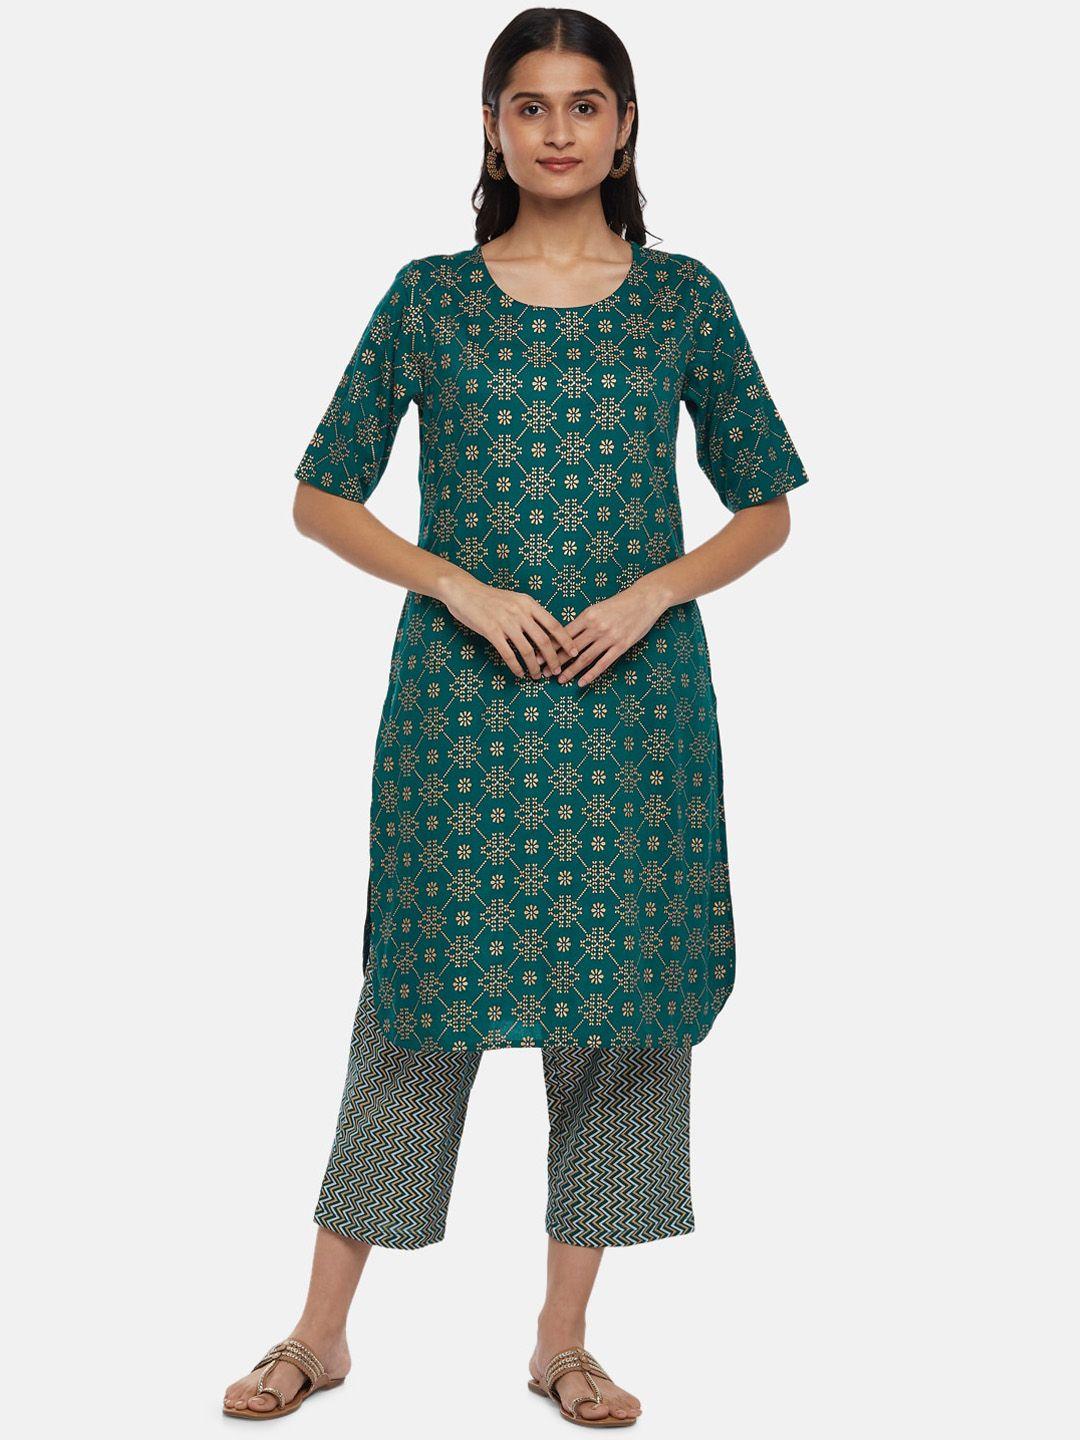 rangmanch by pantaloons women teal printed kurti with trousers